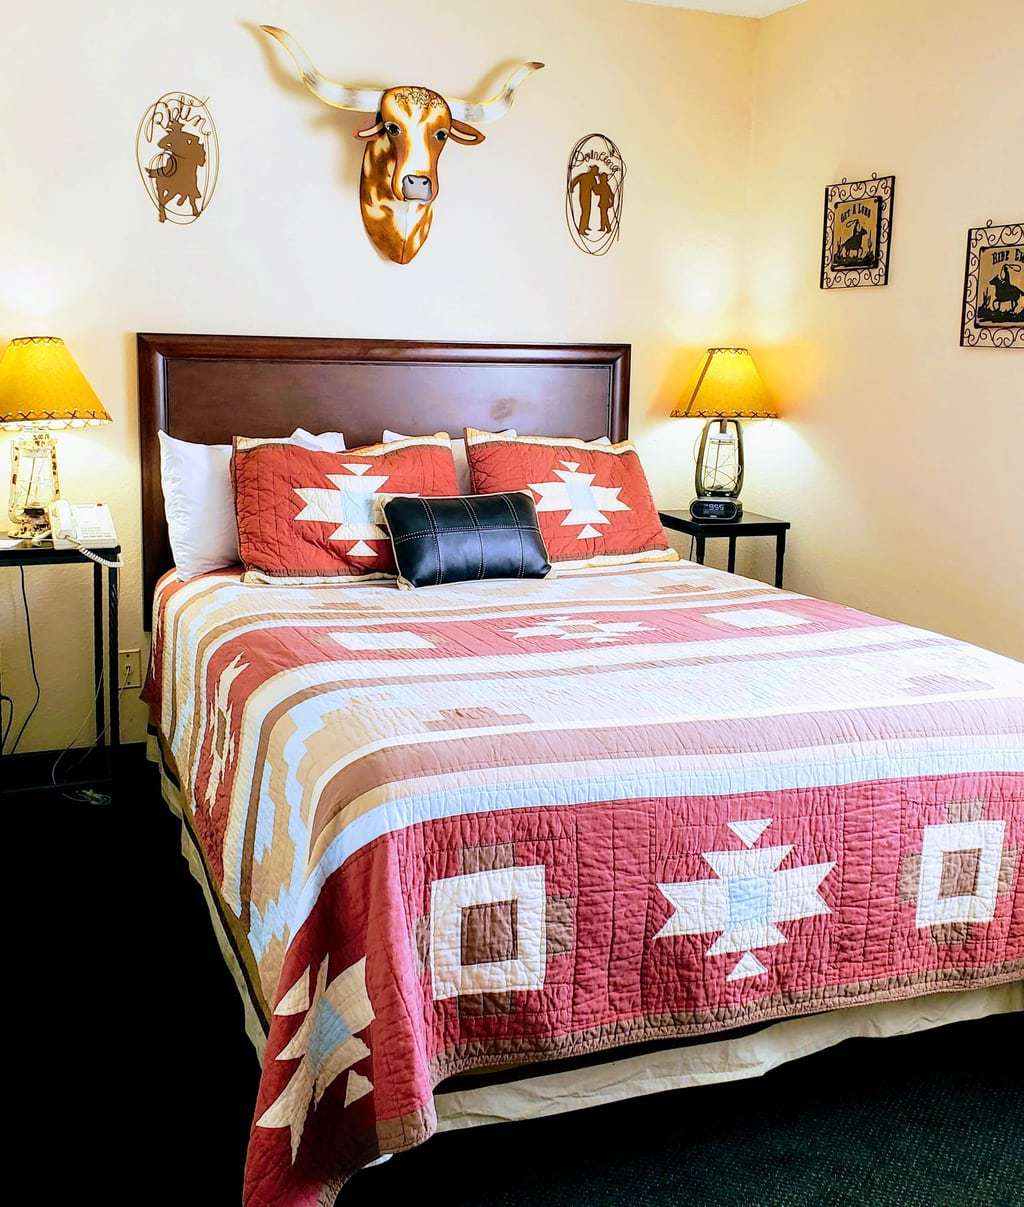 Dolly Parton's Stampede Themed Room at Stone Castle Hotel